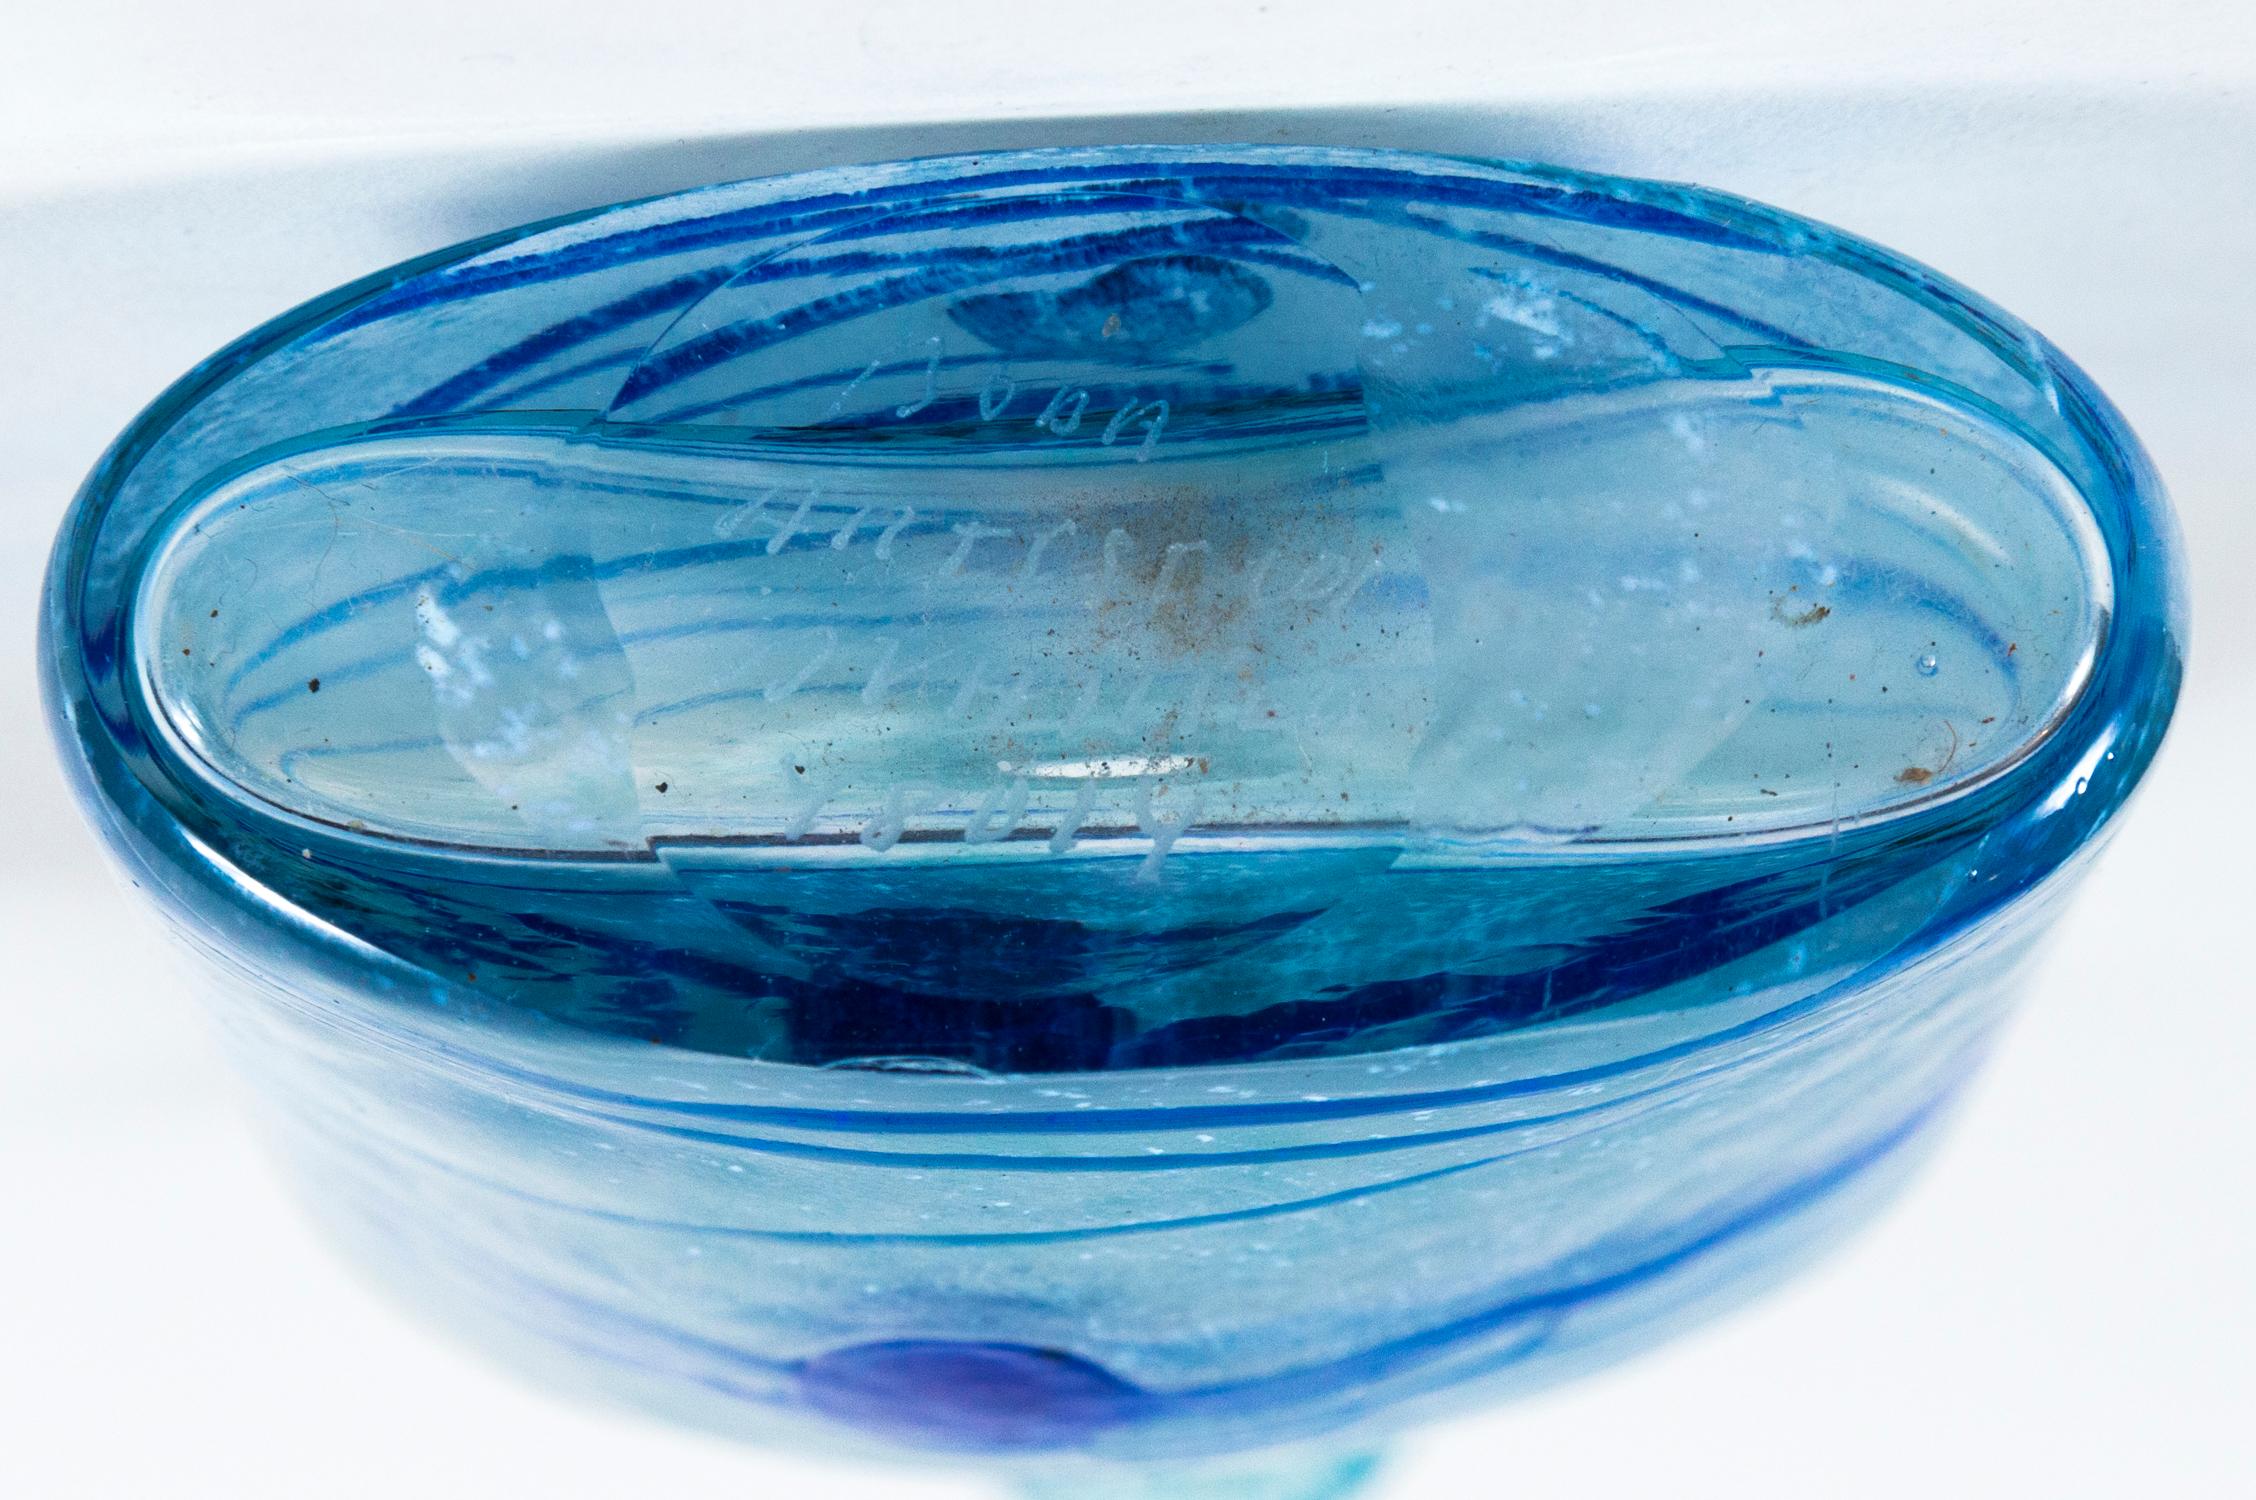 Art Glass Vase, Bertil Vallien, Kosta Boda, Sweden, circa 1970. Frosted hand-blown glass with bright blue applied abstract design, Galaxy series. Signed on bottom. Bertil Vallien (b. 1938) is a renown Swedish glass artist and designer represented in